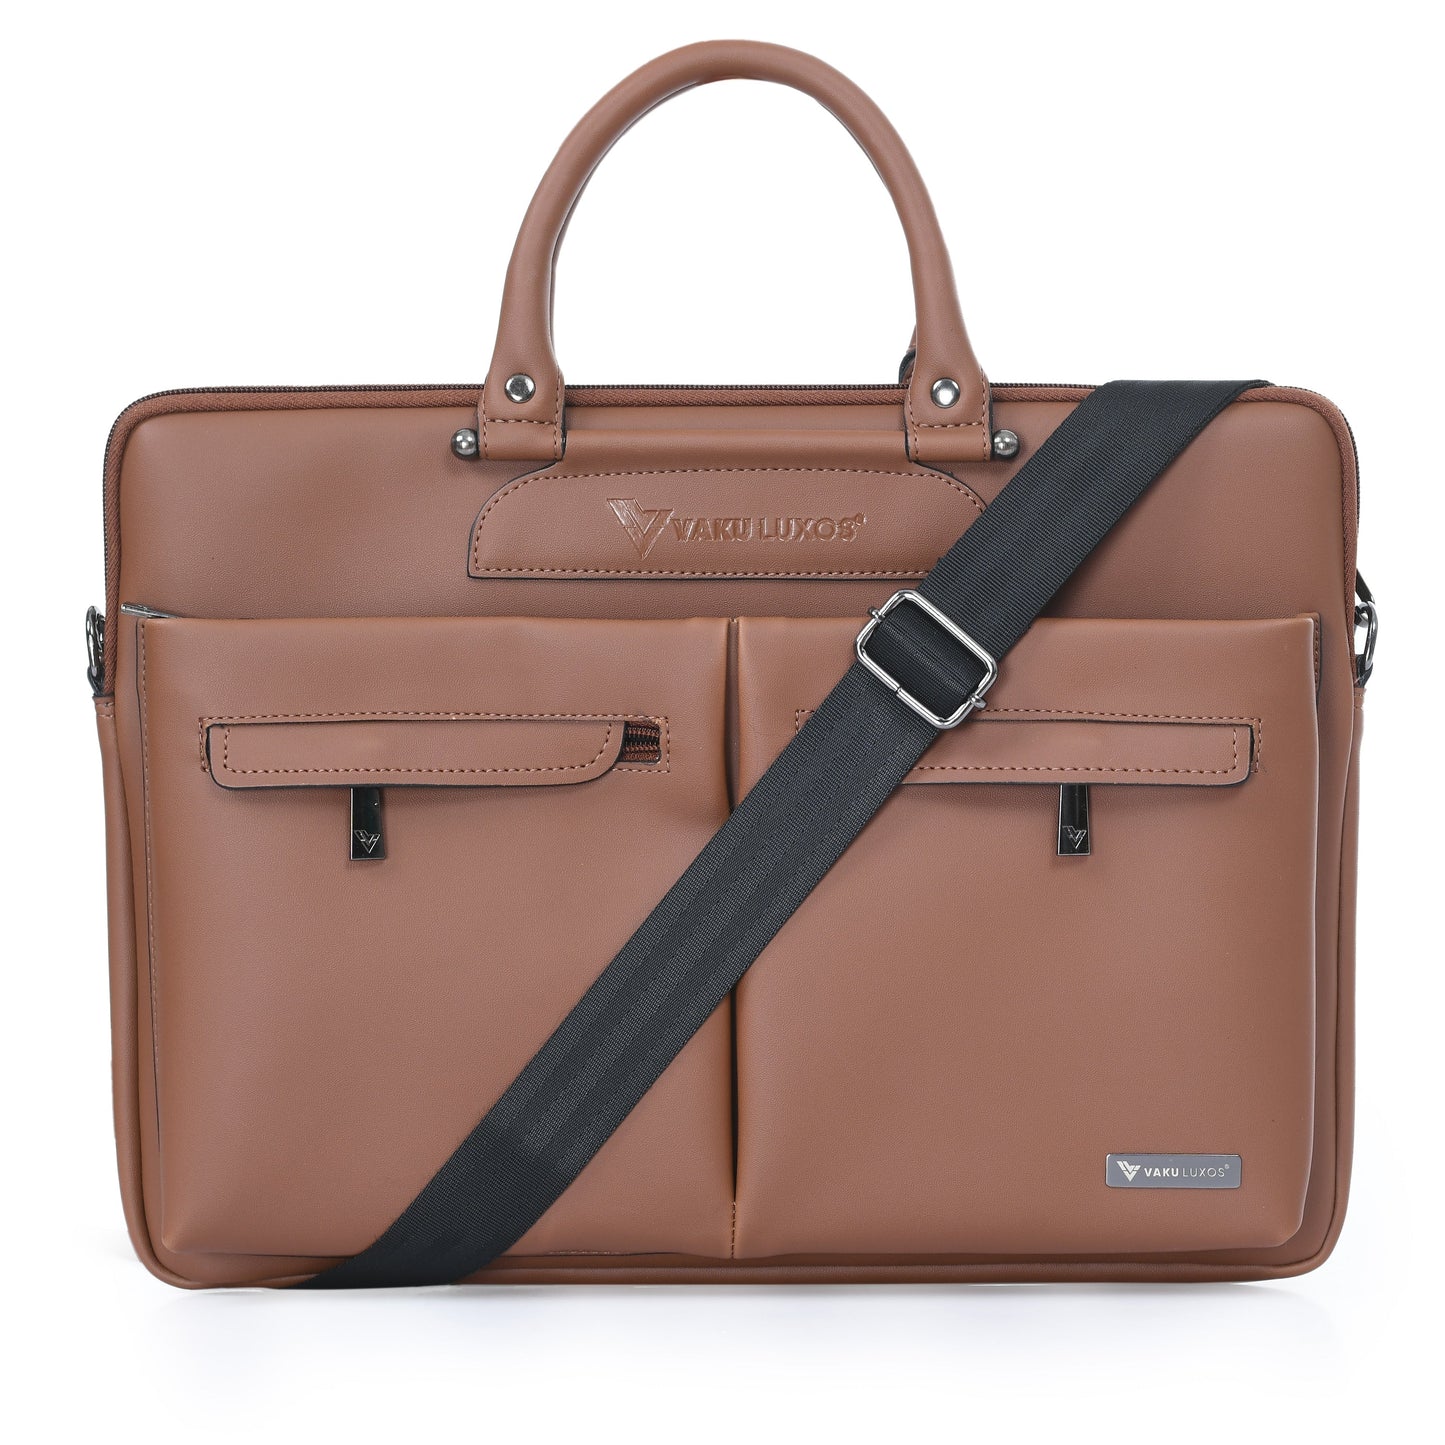 vaku-luxos®-marcella-with-2-front-zippered-pockets-sleeve-for-macbook-13-14-with-strap-highly-durable-tan-brown8905129026196